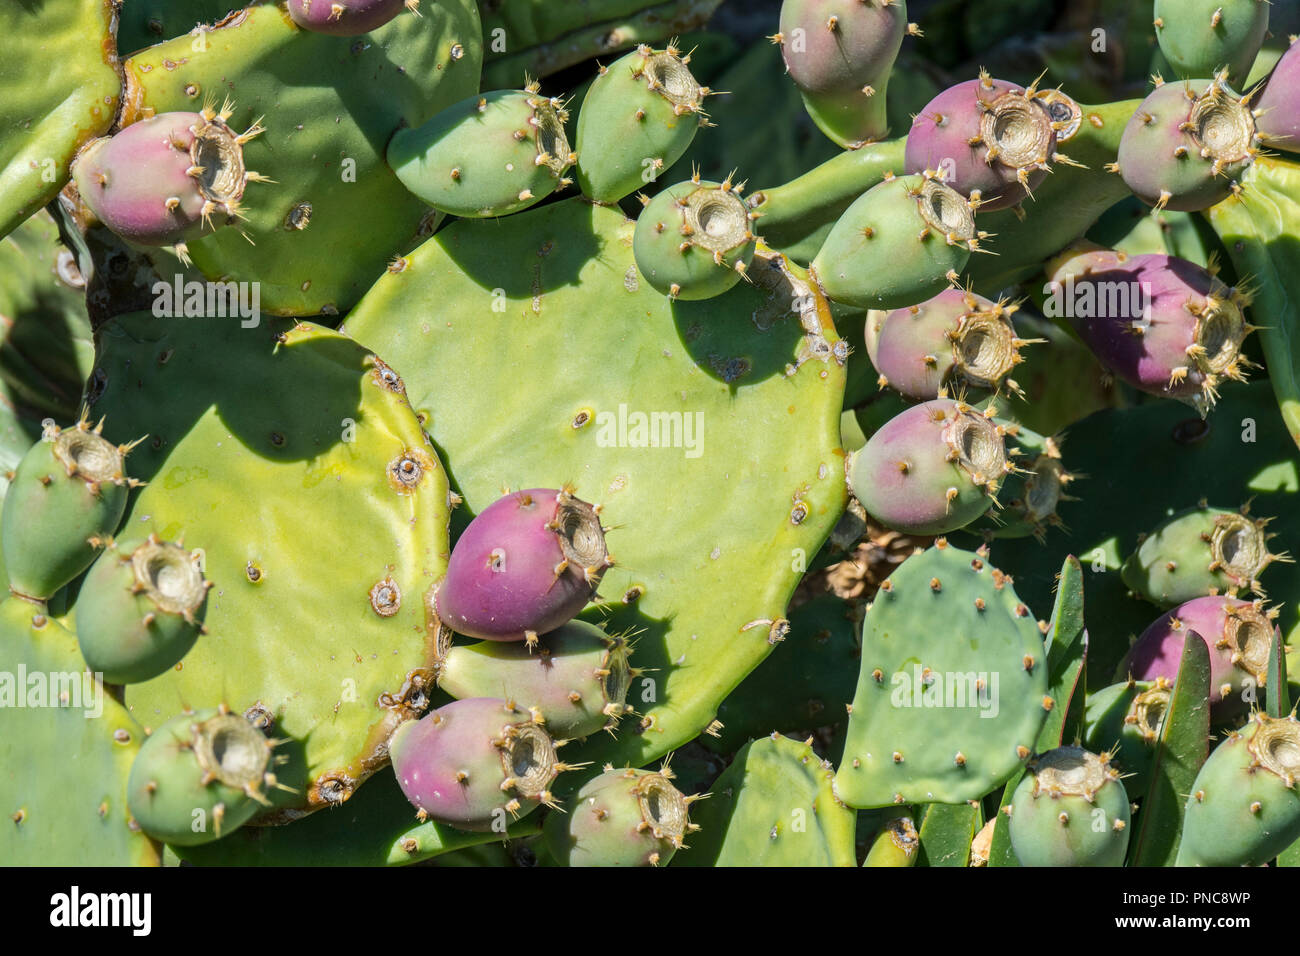 Indian fig opuntia / Barbary fig (Opuntia ficus-indica) prickly pear cactus showing fruit along the French Mediterranean coast, France Stock Photo